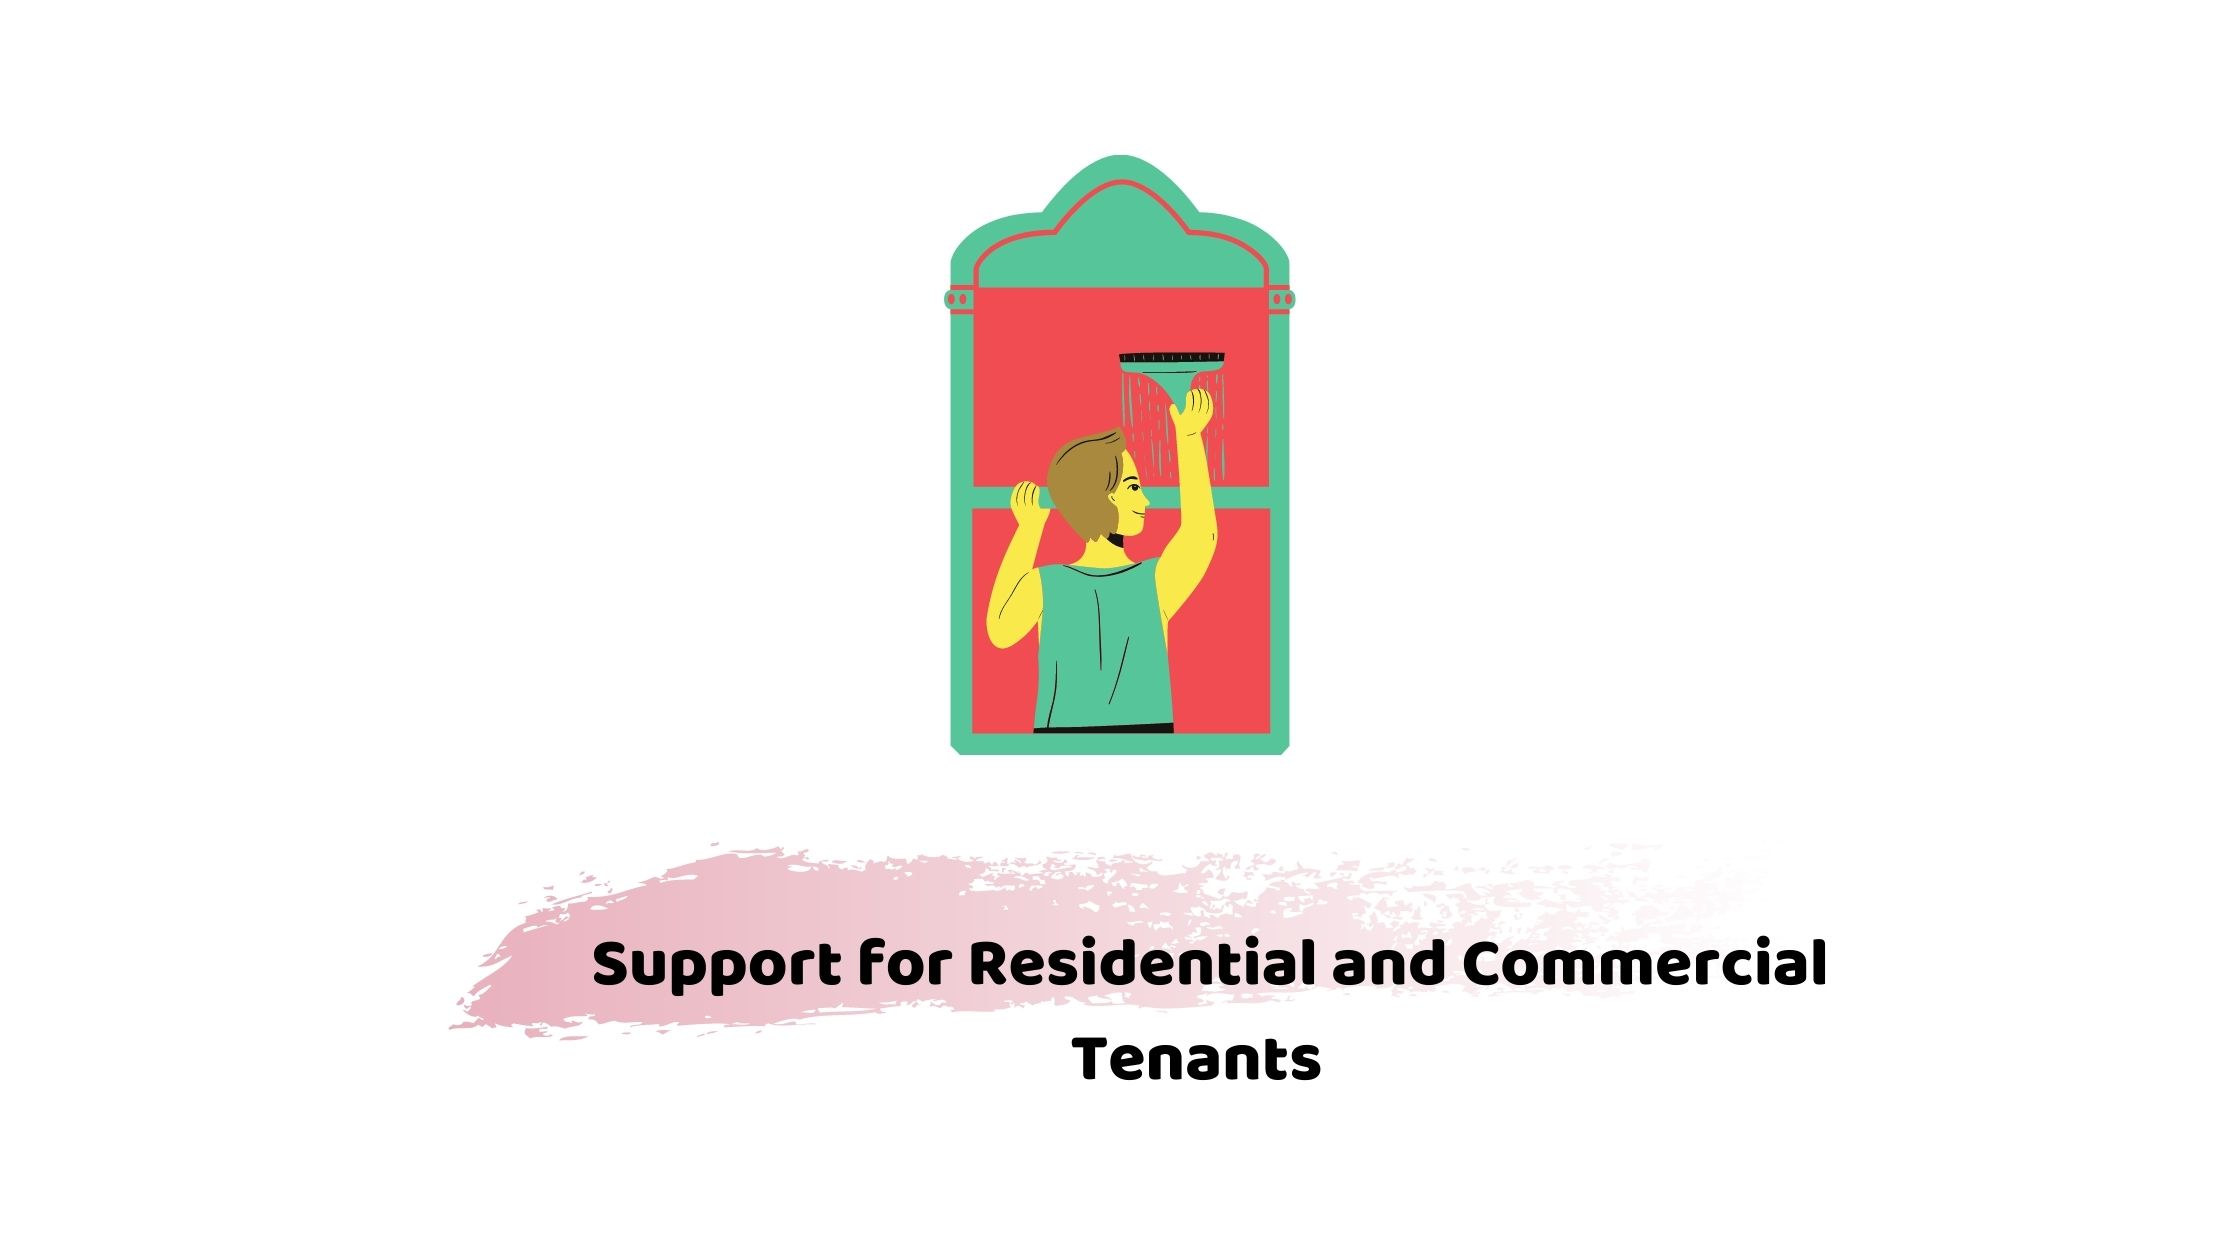 Residential and commercial tenants